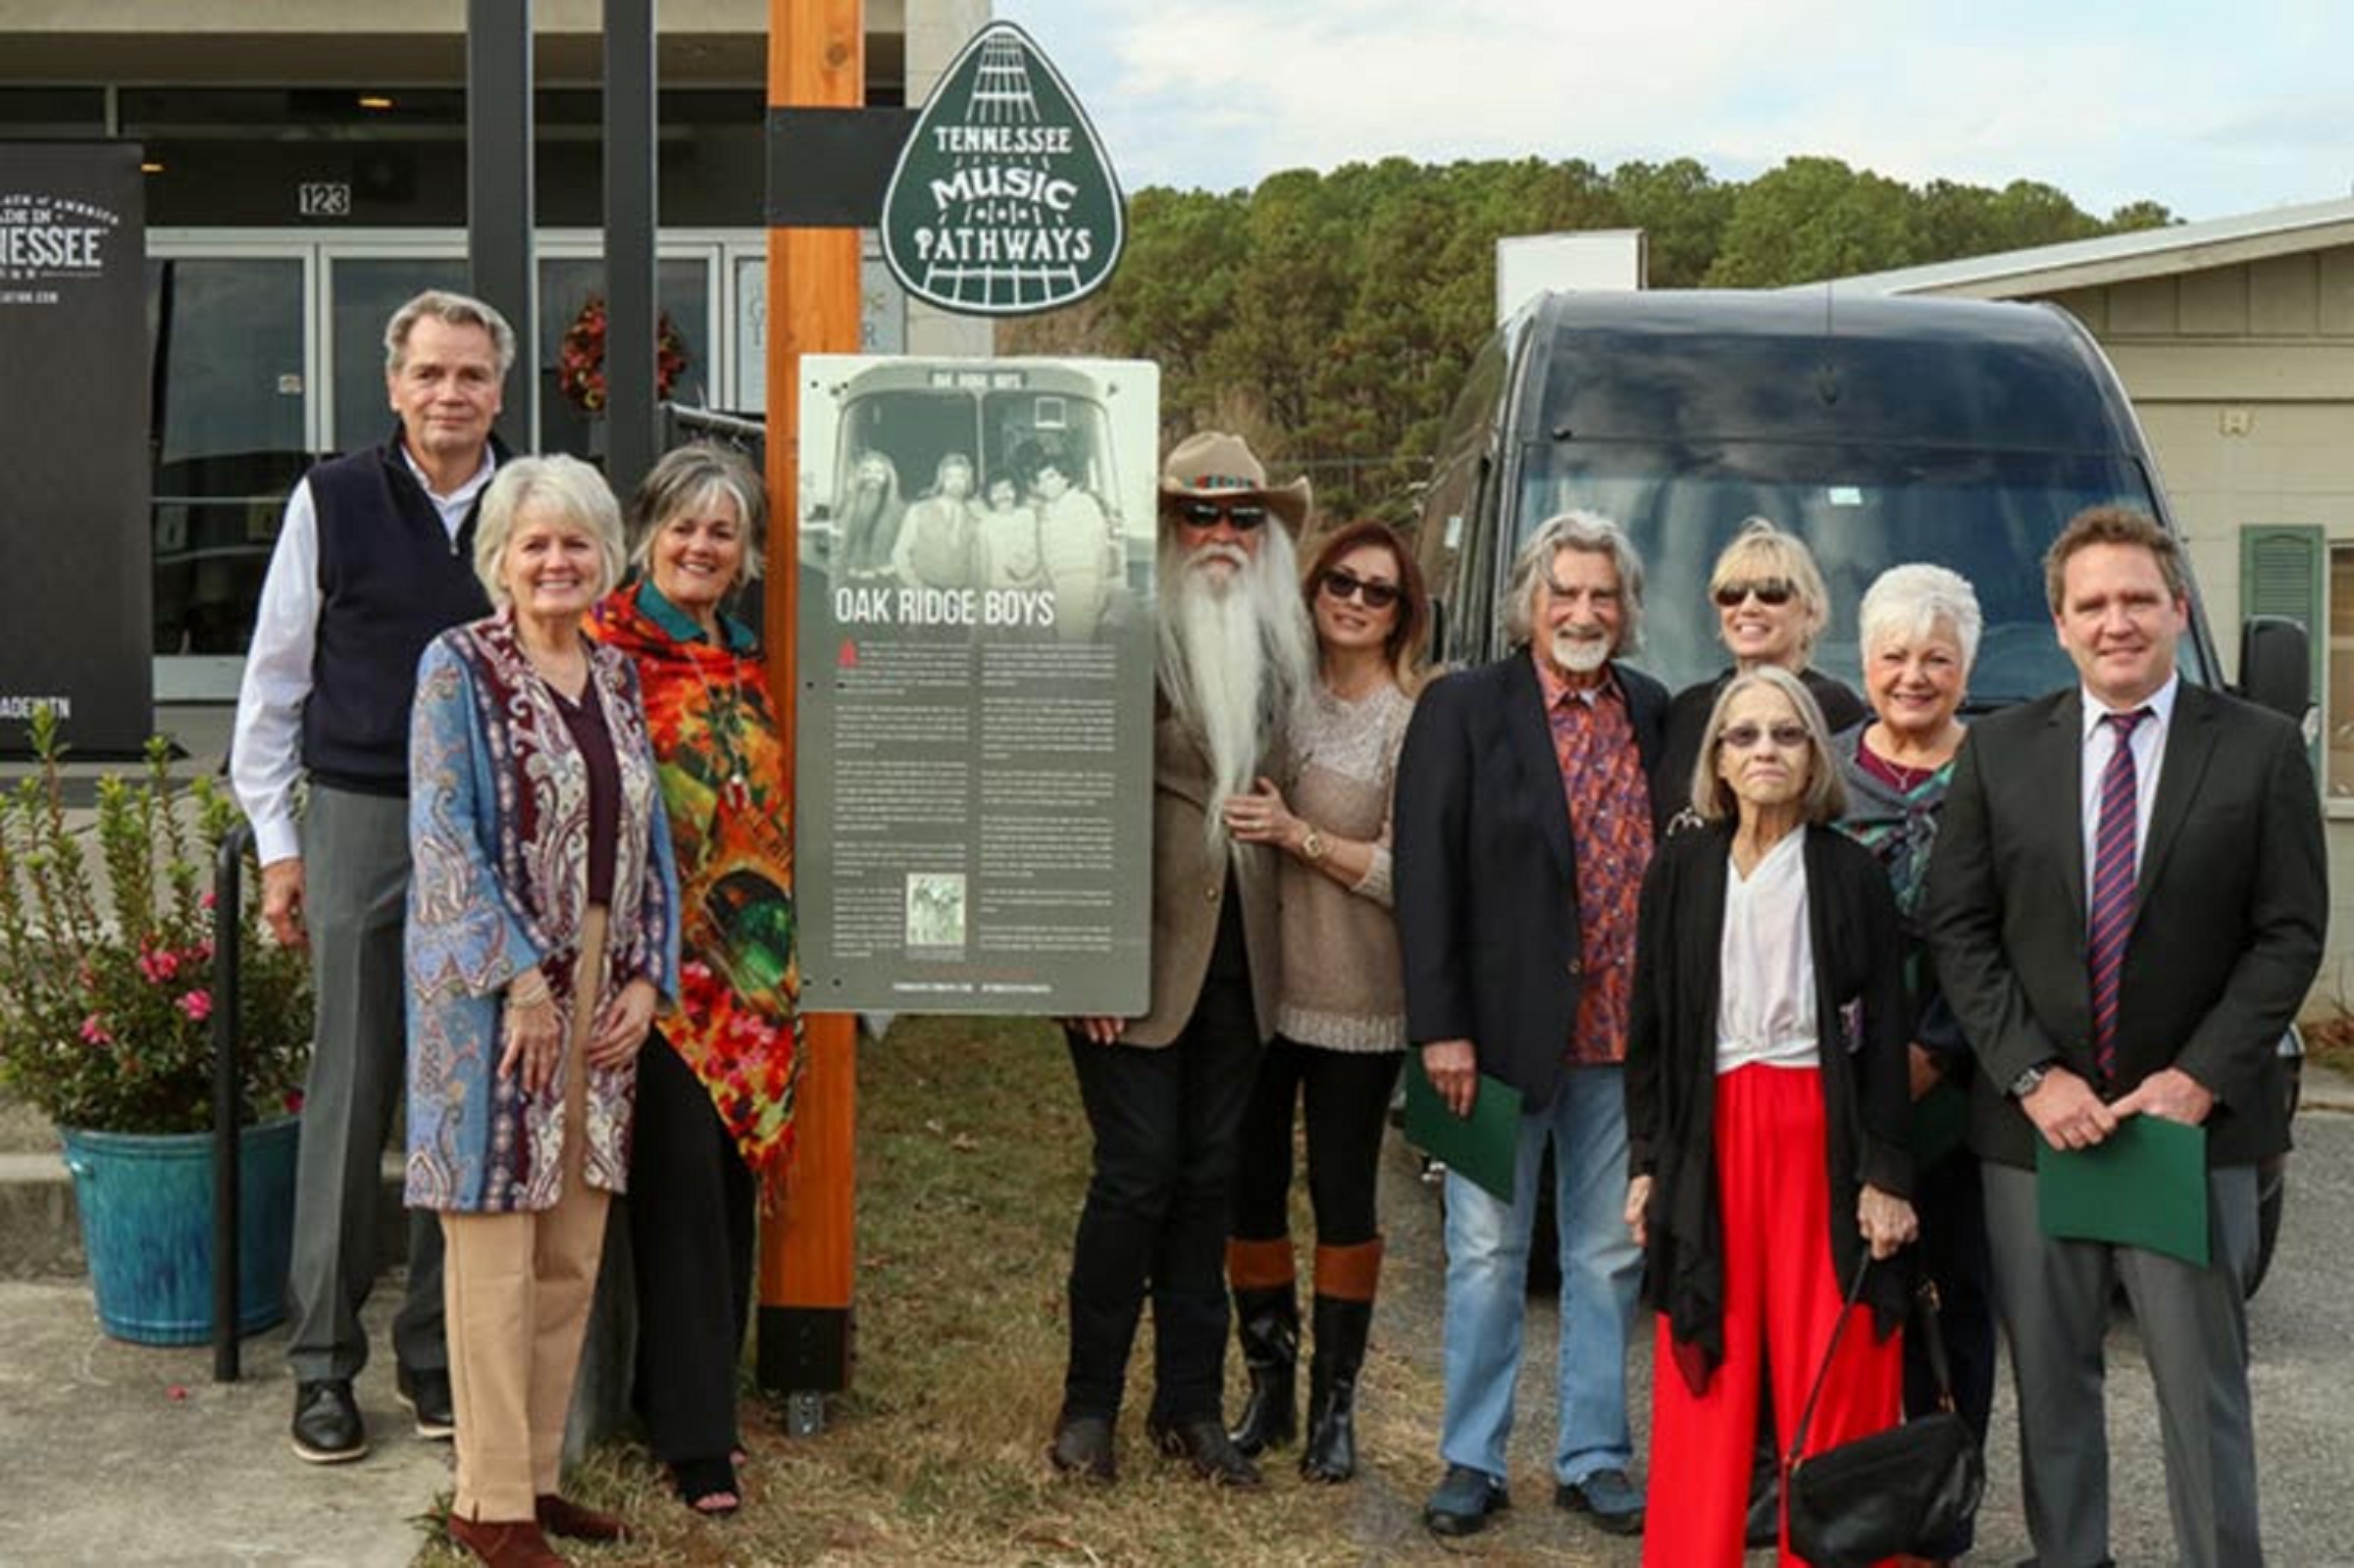 The Oak Ridge Boys Honored With "Tennessee Music Pathways" Marker In Oak Ridge, Tennessee